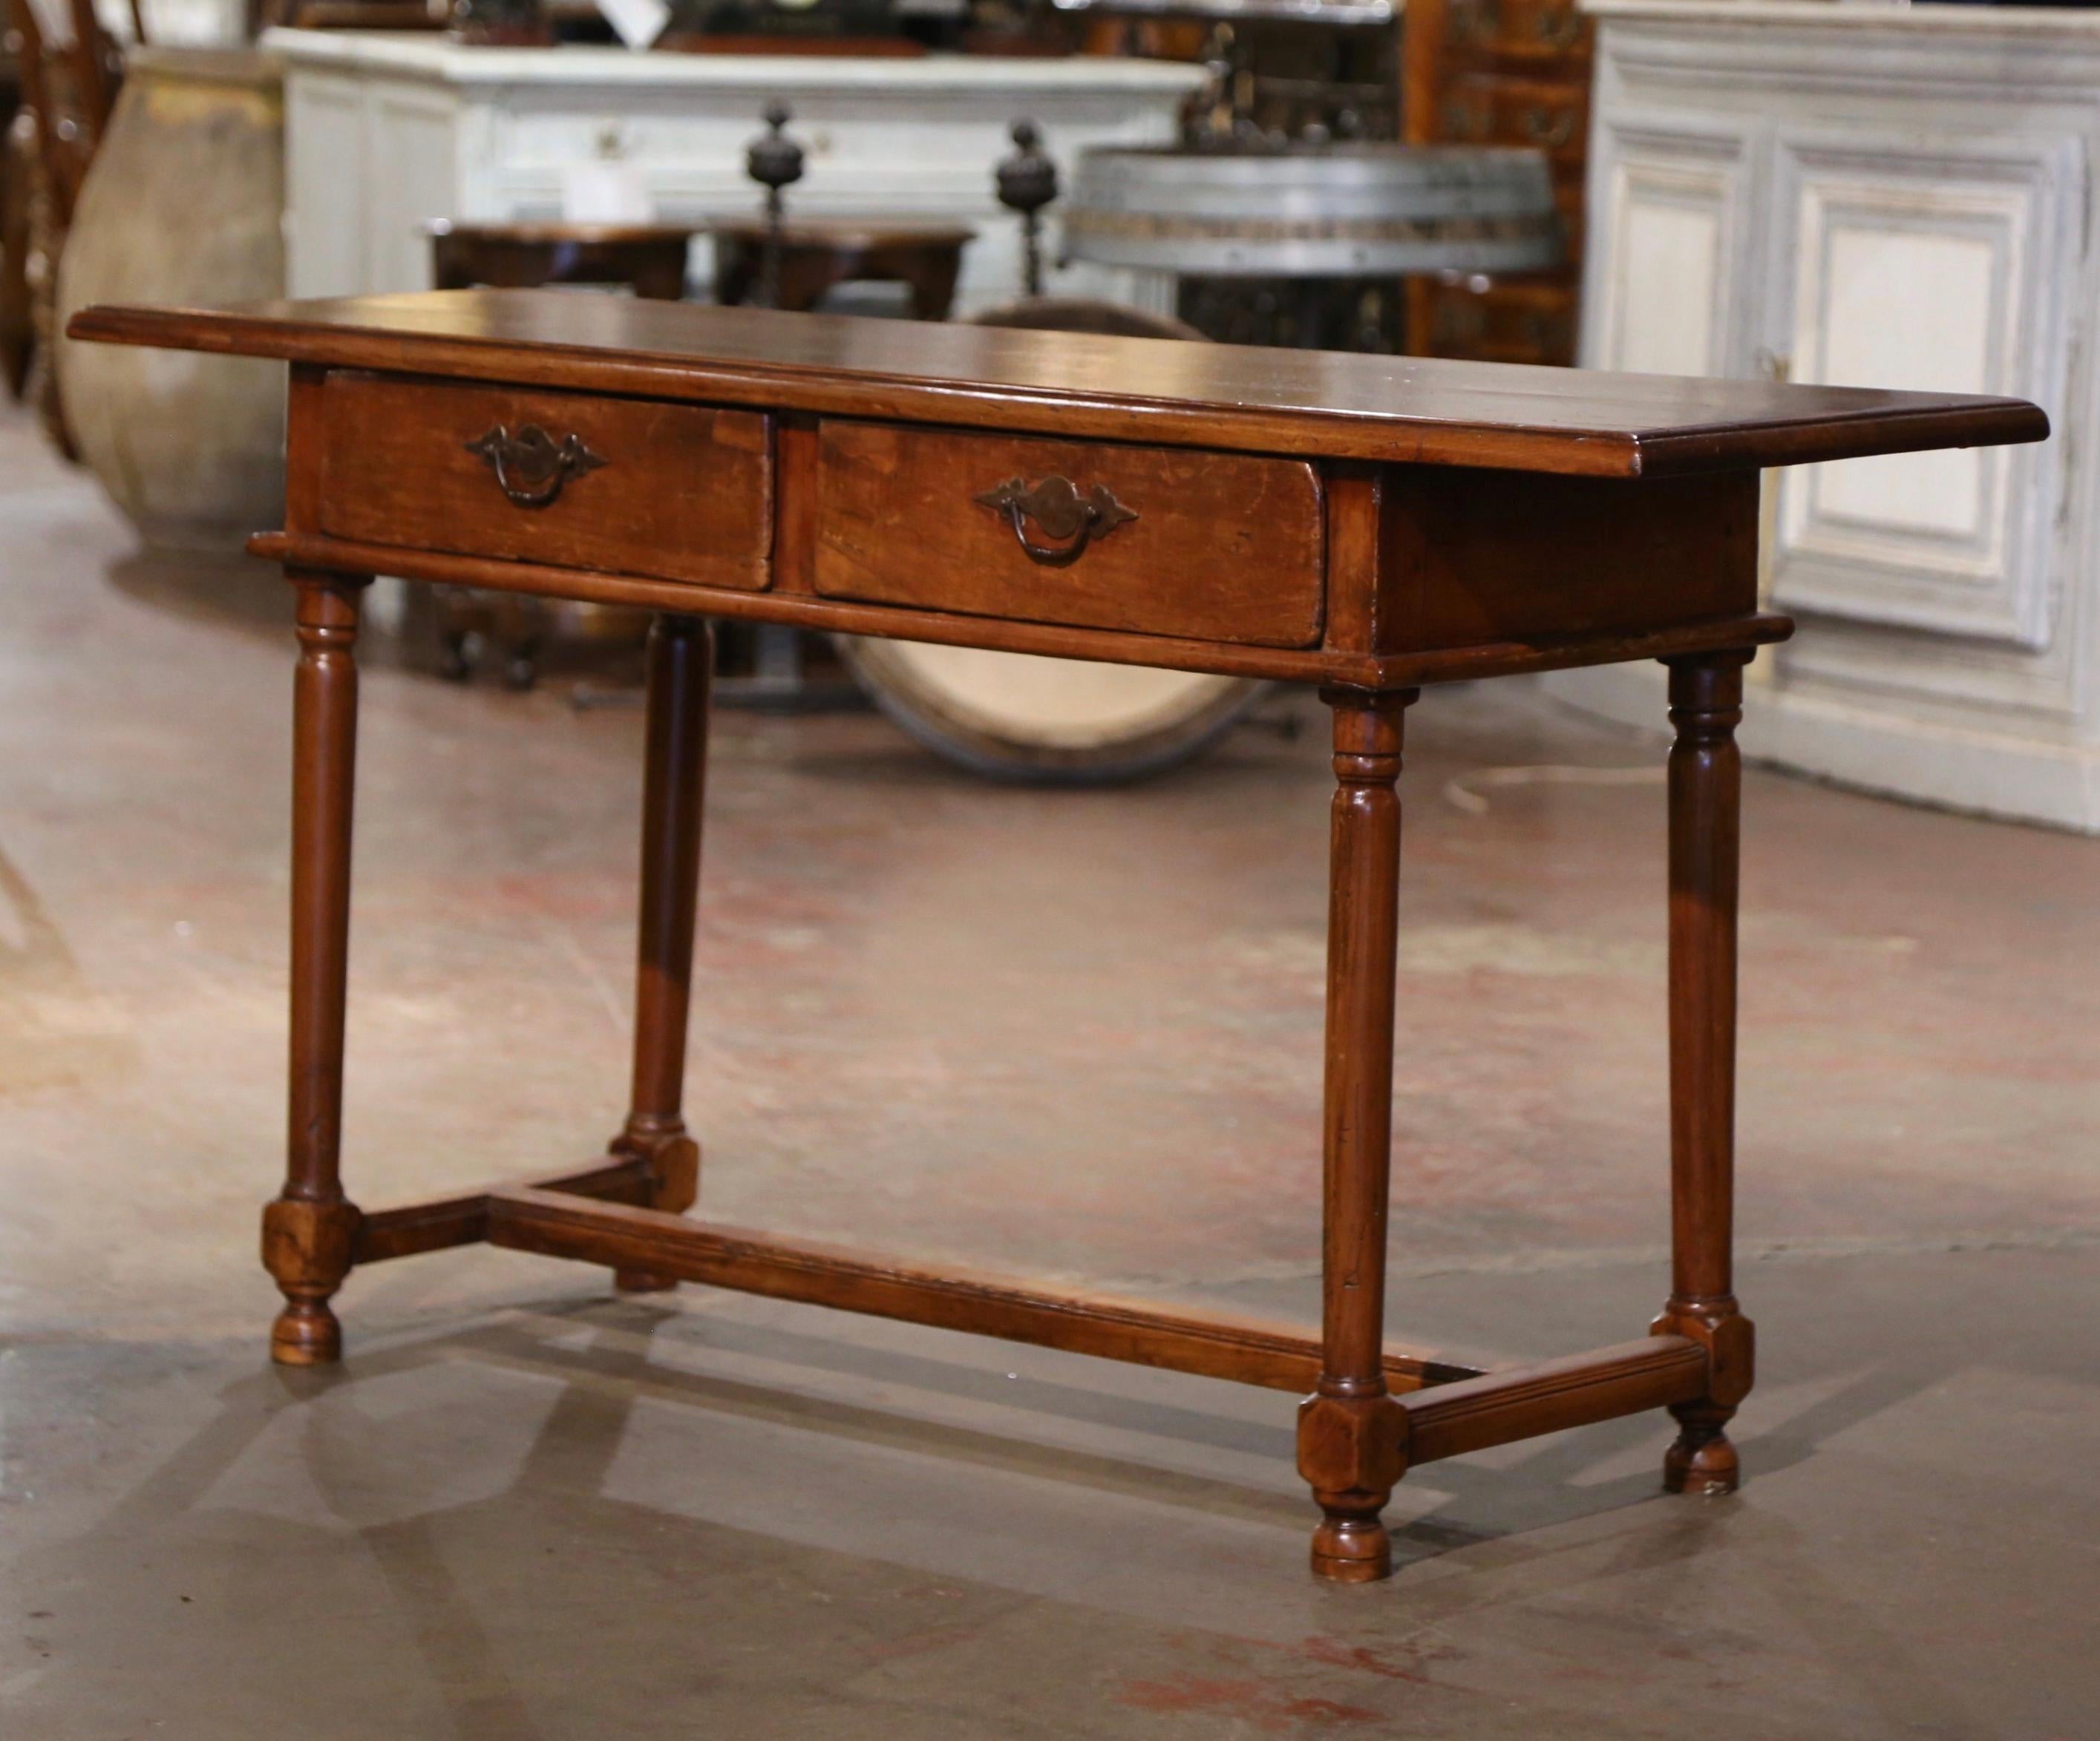 Dress an entryway or hall way with this elegant, antique console. Crafted in France, circa 1820, the simple, narrow, fruit wood table stands on four turned legs embellished with a bottom stretcher. The table features two drawers across the front